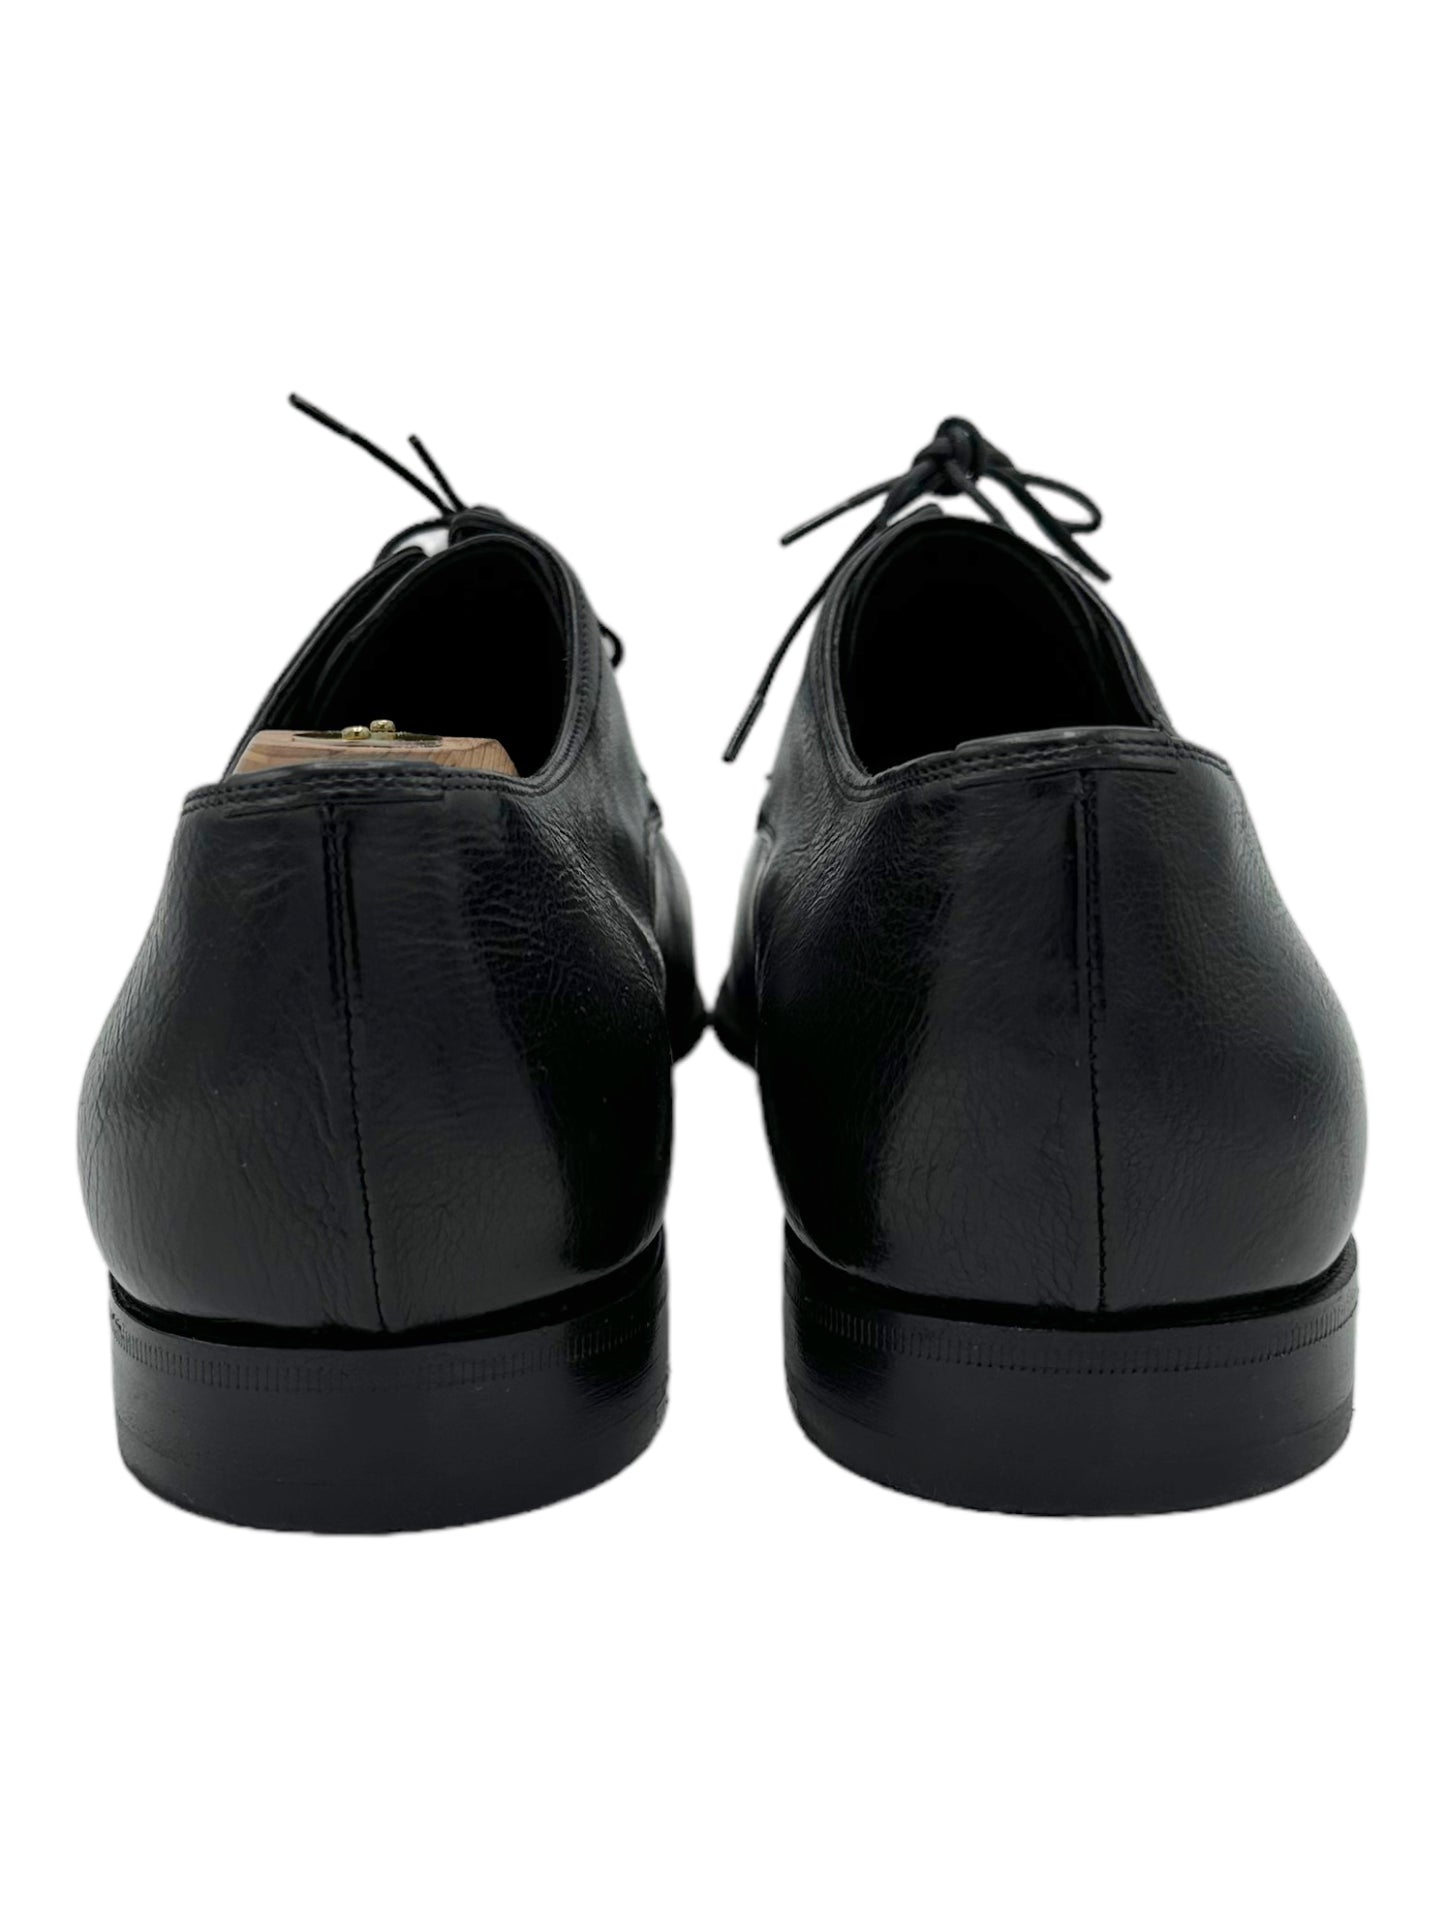 Prada Black Grained Leather Slim Derby Dress Shoes - Genuine Design Luxury Consignment. New & Pre-Owned Clothing, Shoes, & Accessories. Calgary, Canada